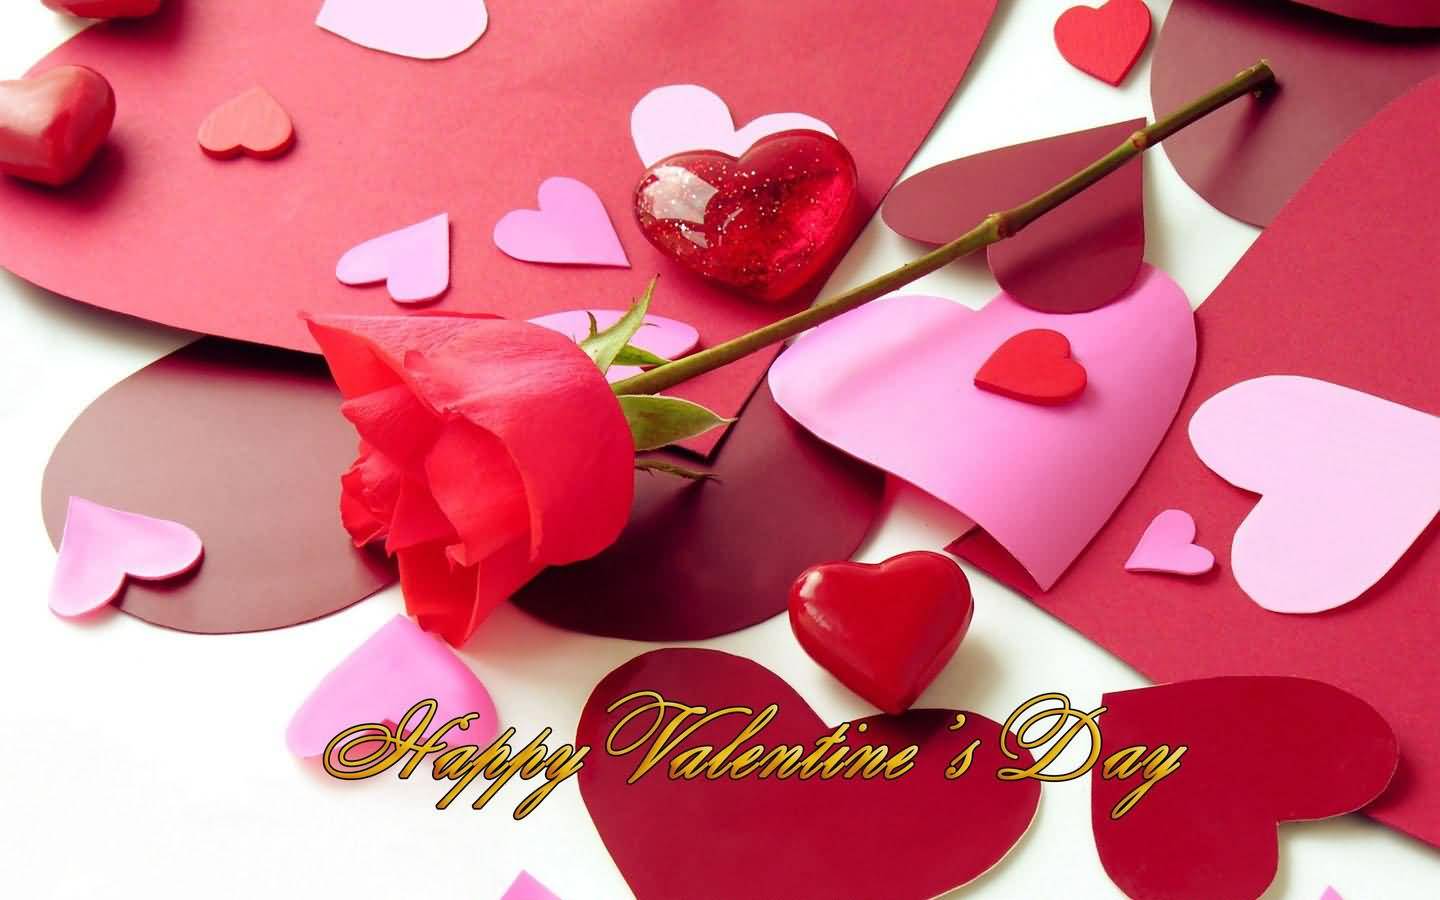 Happy Valentine's Day Paper Hearts And Rose Bud Wallpaper